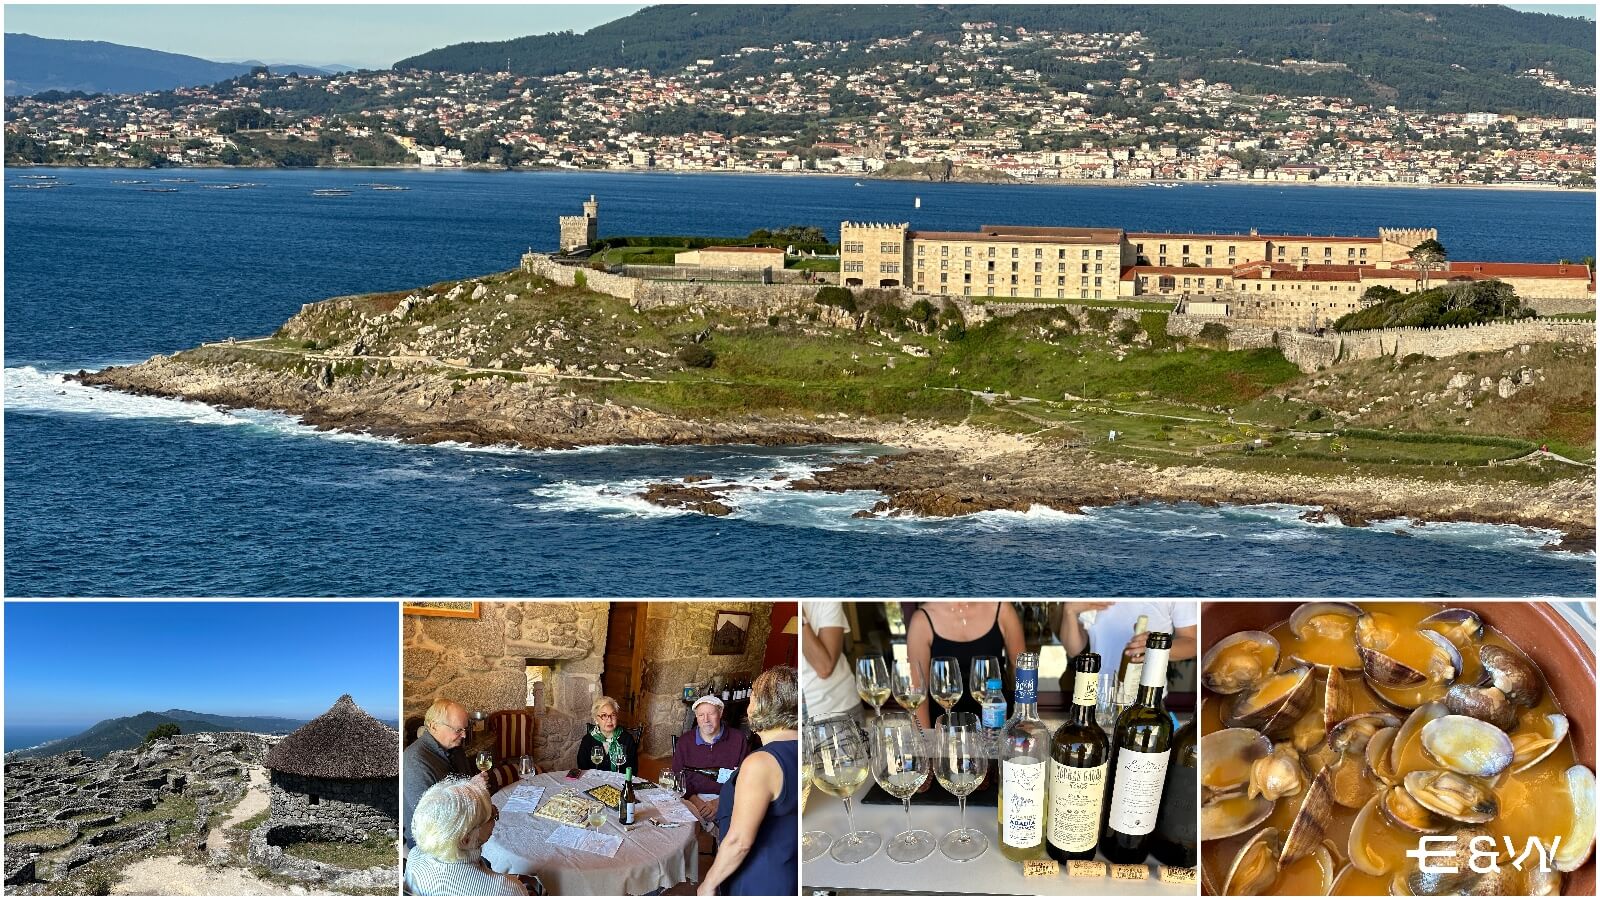 What to do in Galicia? Our top plans - Visit cities brimming with history  - Wine and Food Tours in Baiona